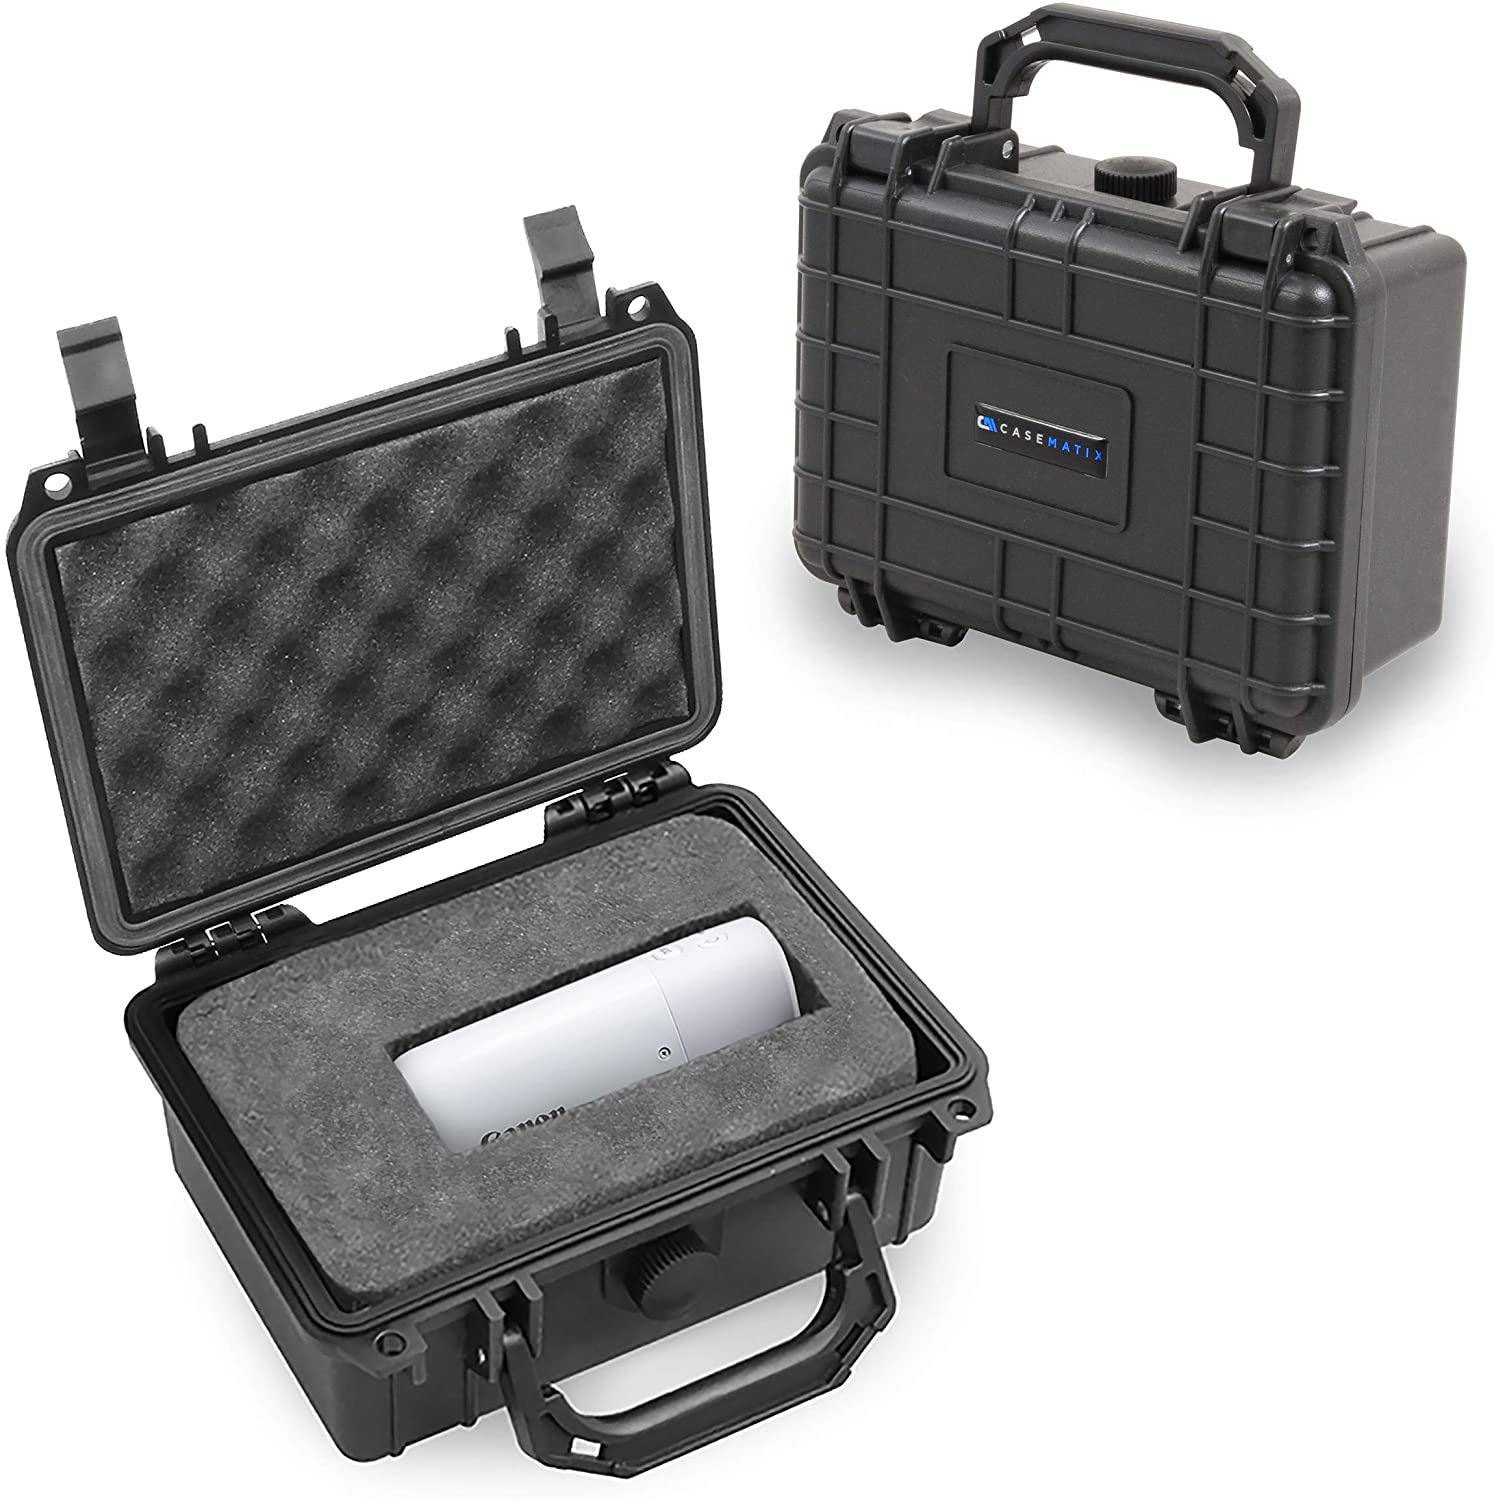 Basics Small Hard Camera Carrying Case Waterproof Carry-on